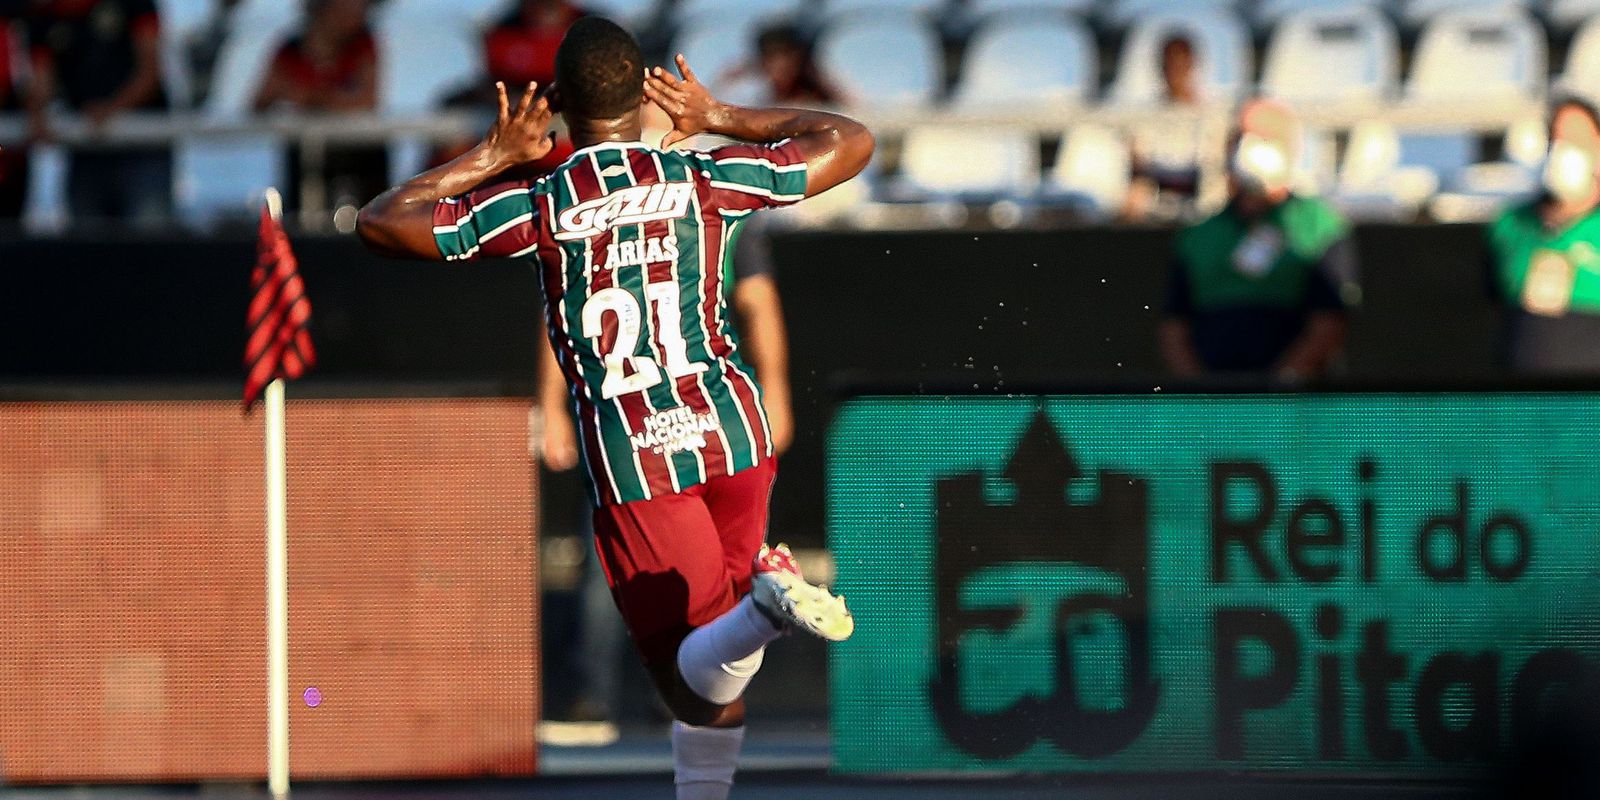 Fluminense is lethal and beats Flamengo in the first Carioca classic